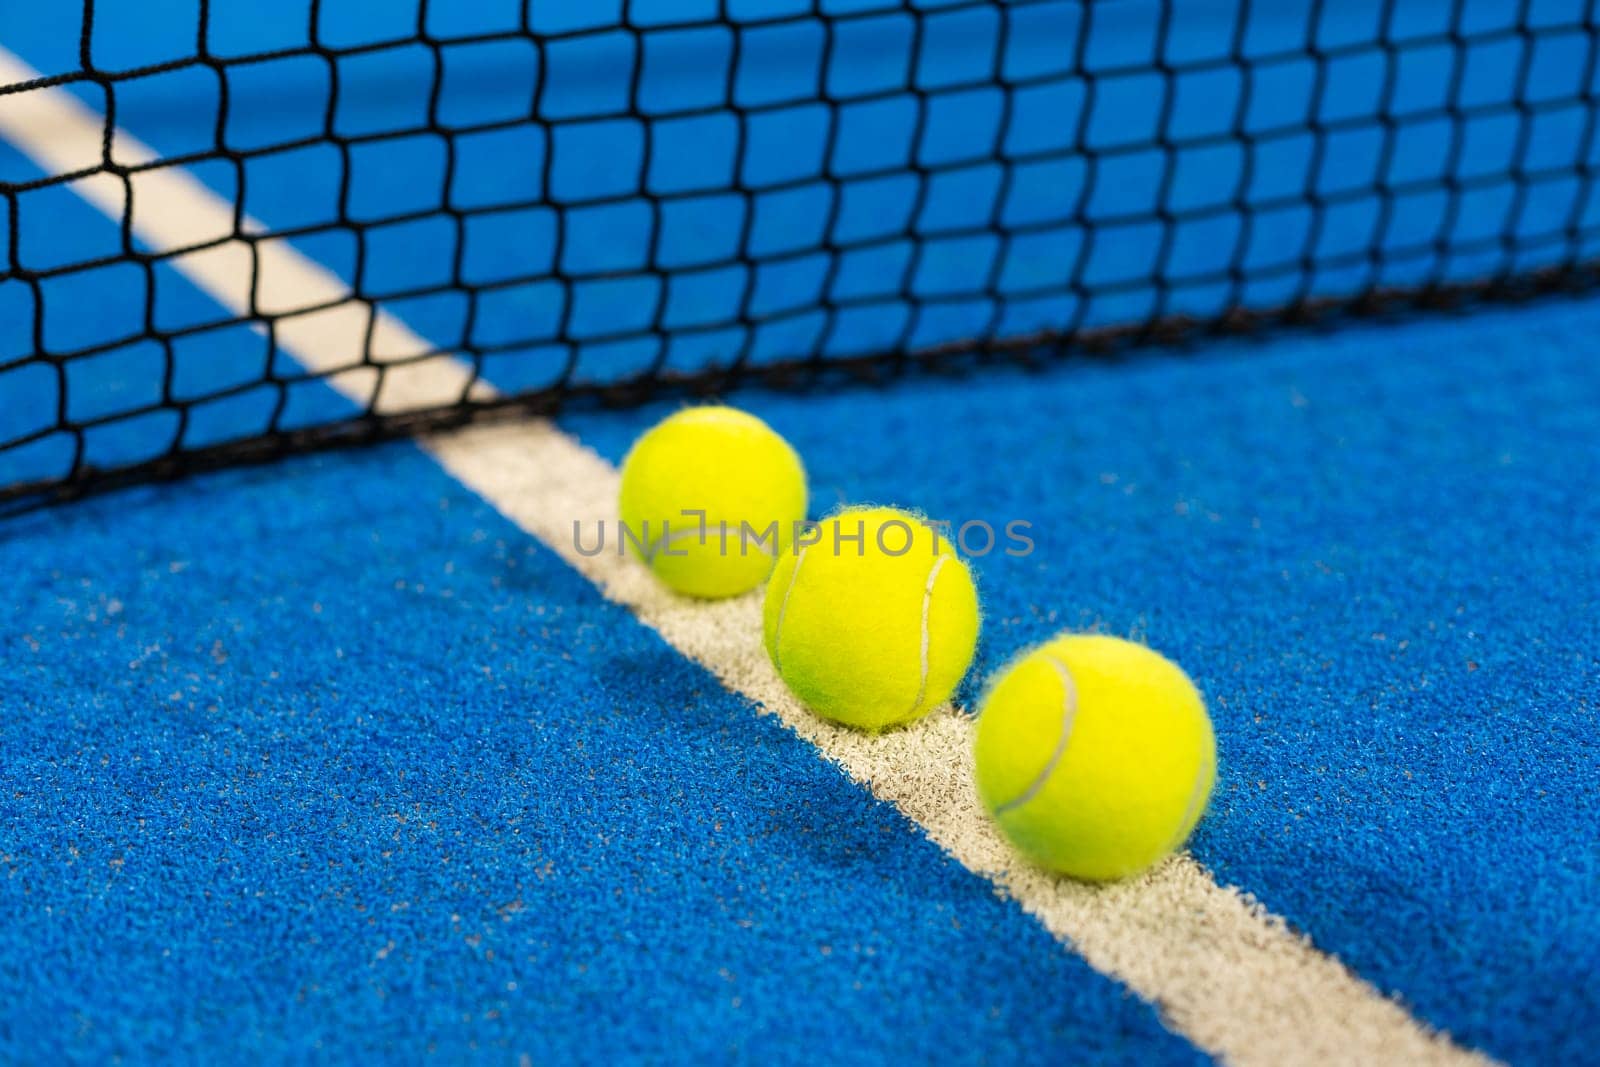 balls near the net of a blue padel tennis court by Andelov13